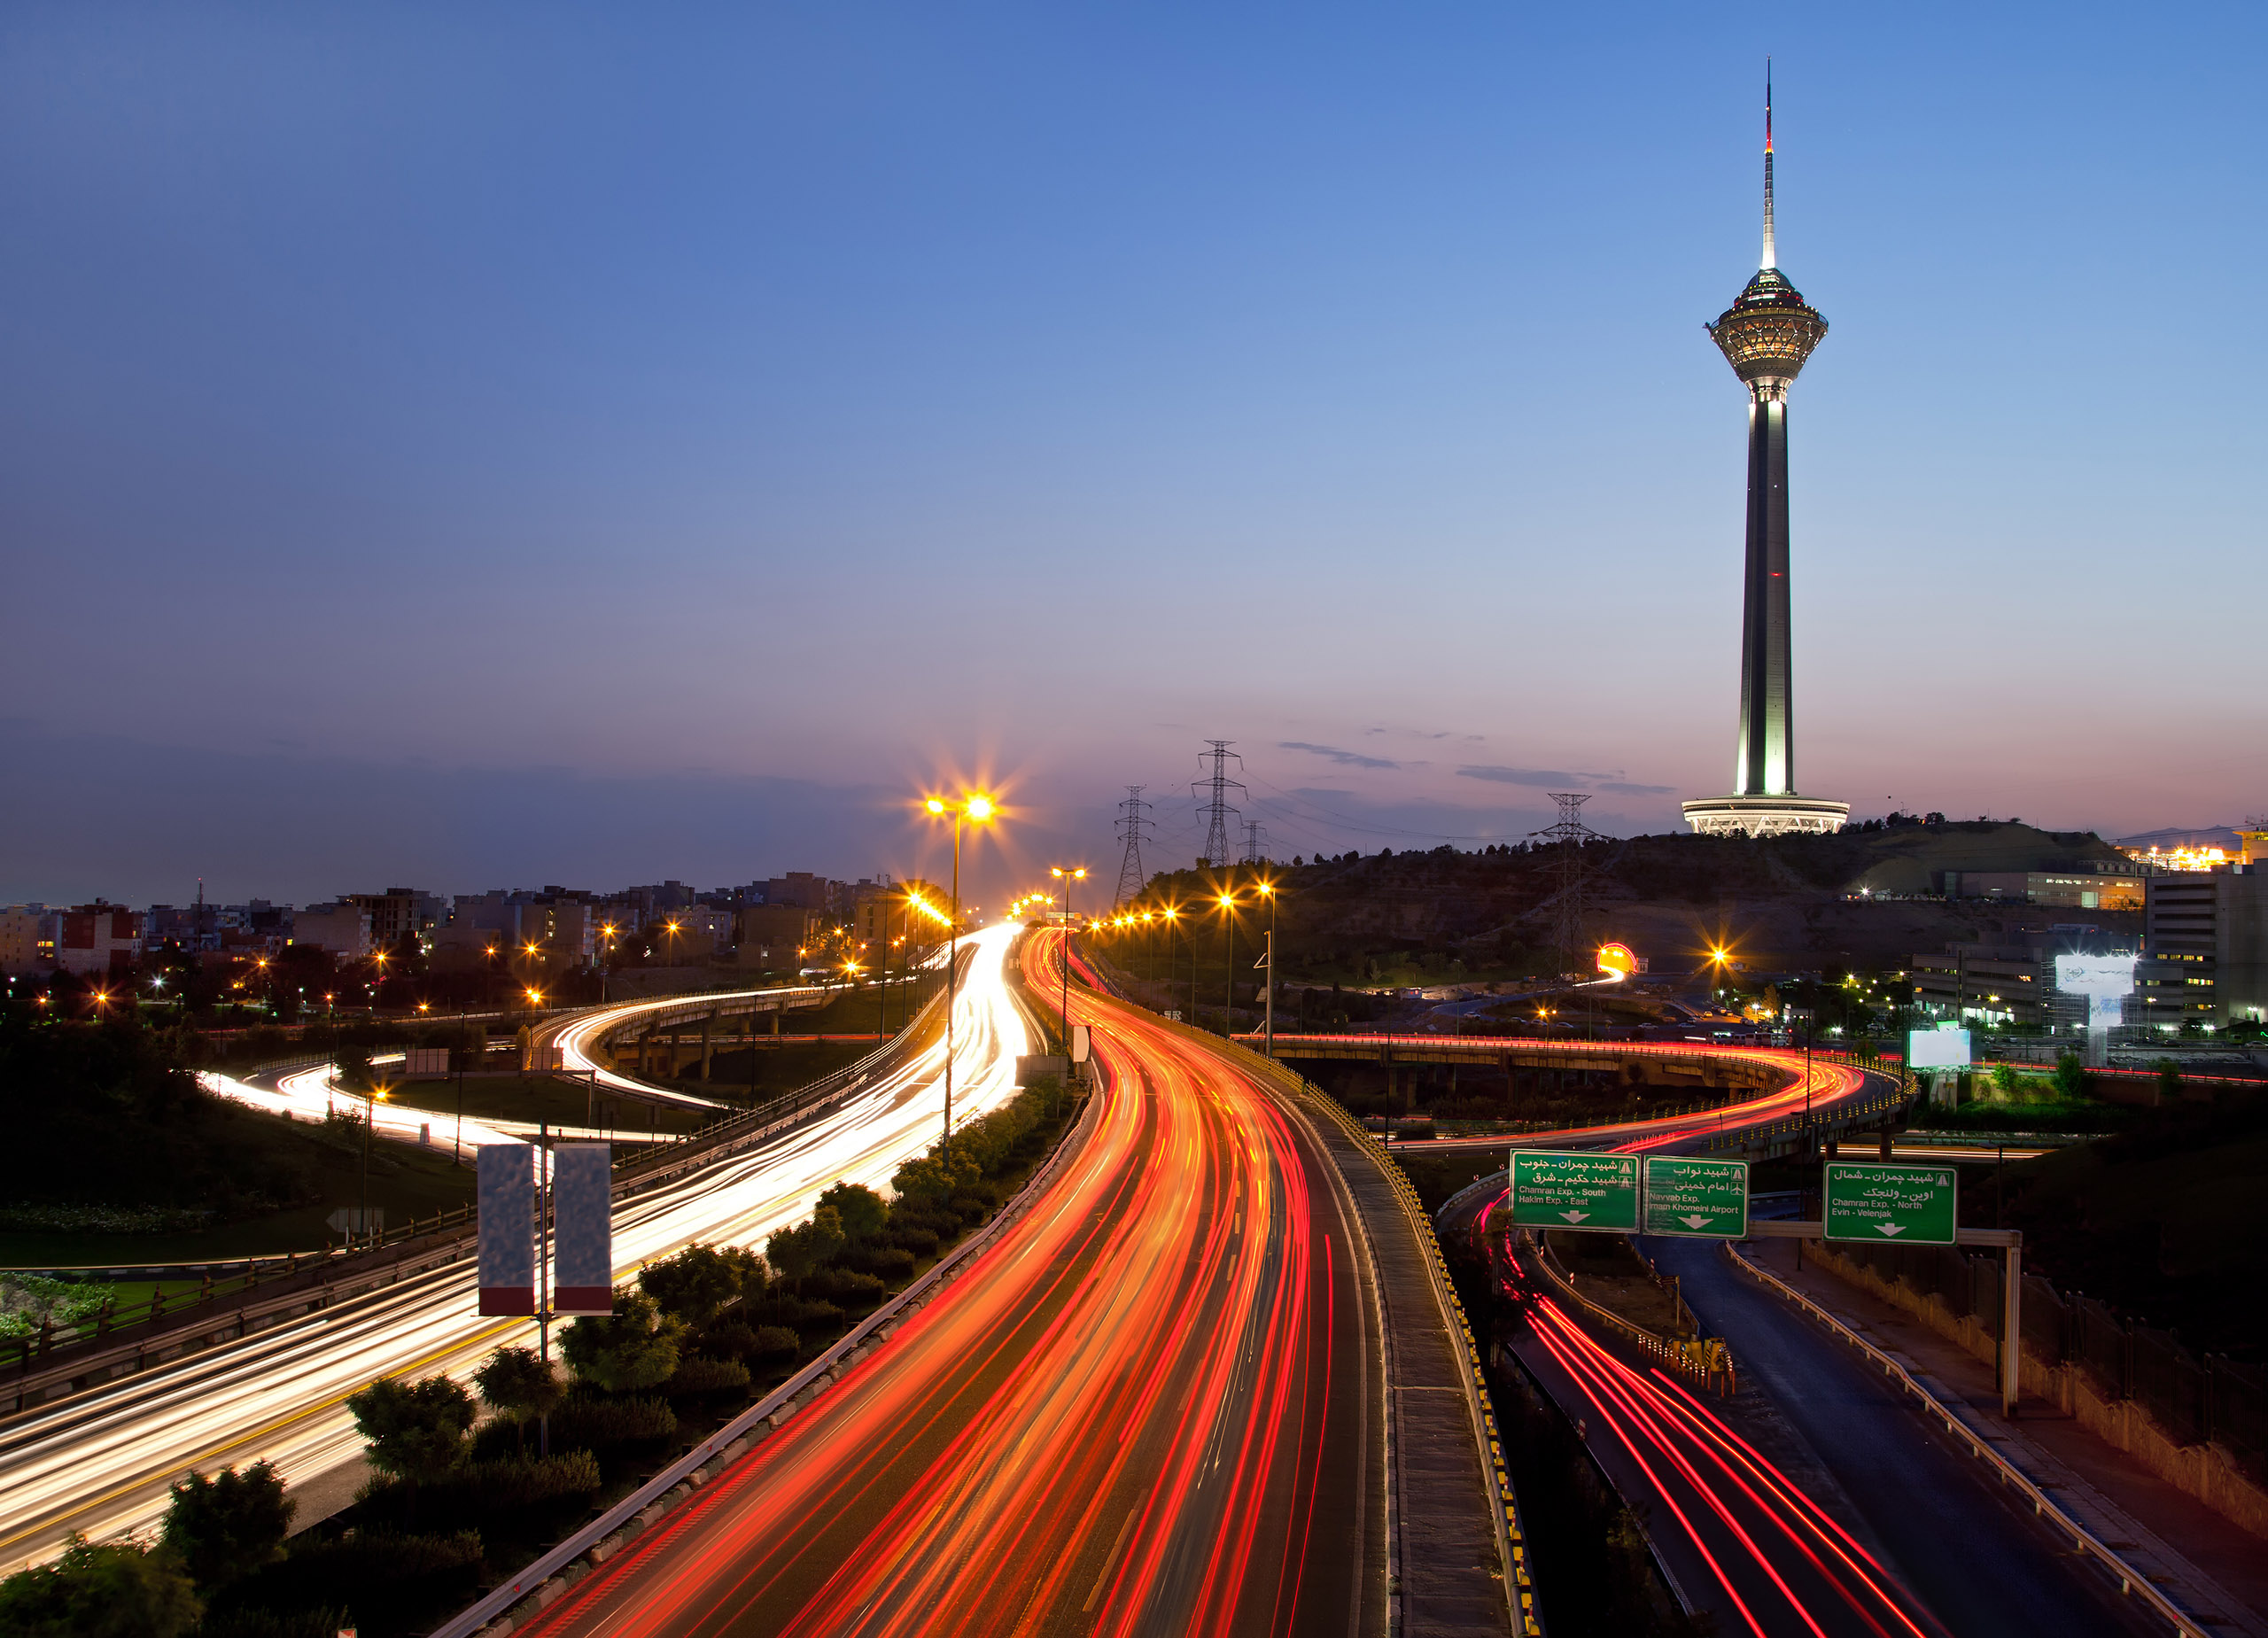 TEHRAN - JULY 16: Night shot from streets of Tehran and Illuminated Milad Tower on July 16, 2011 in Tehran, Iran. Milad Tower is the second most important landmark of Tehran, after Azadi Monument.